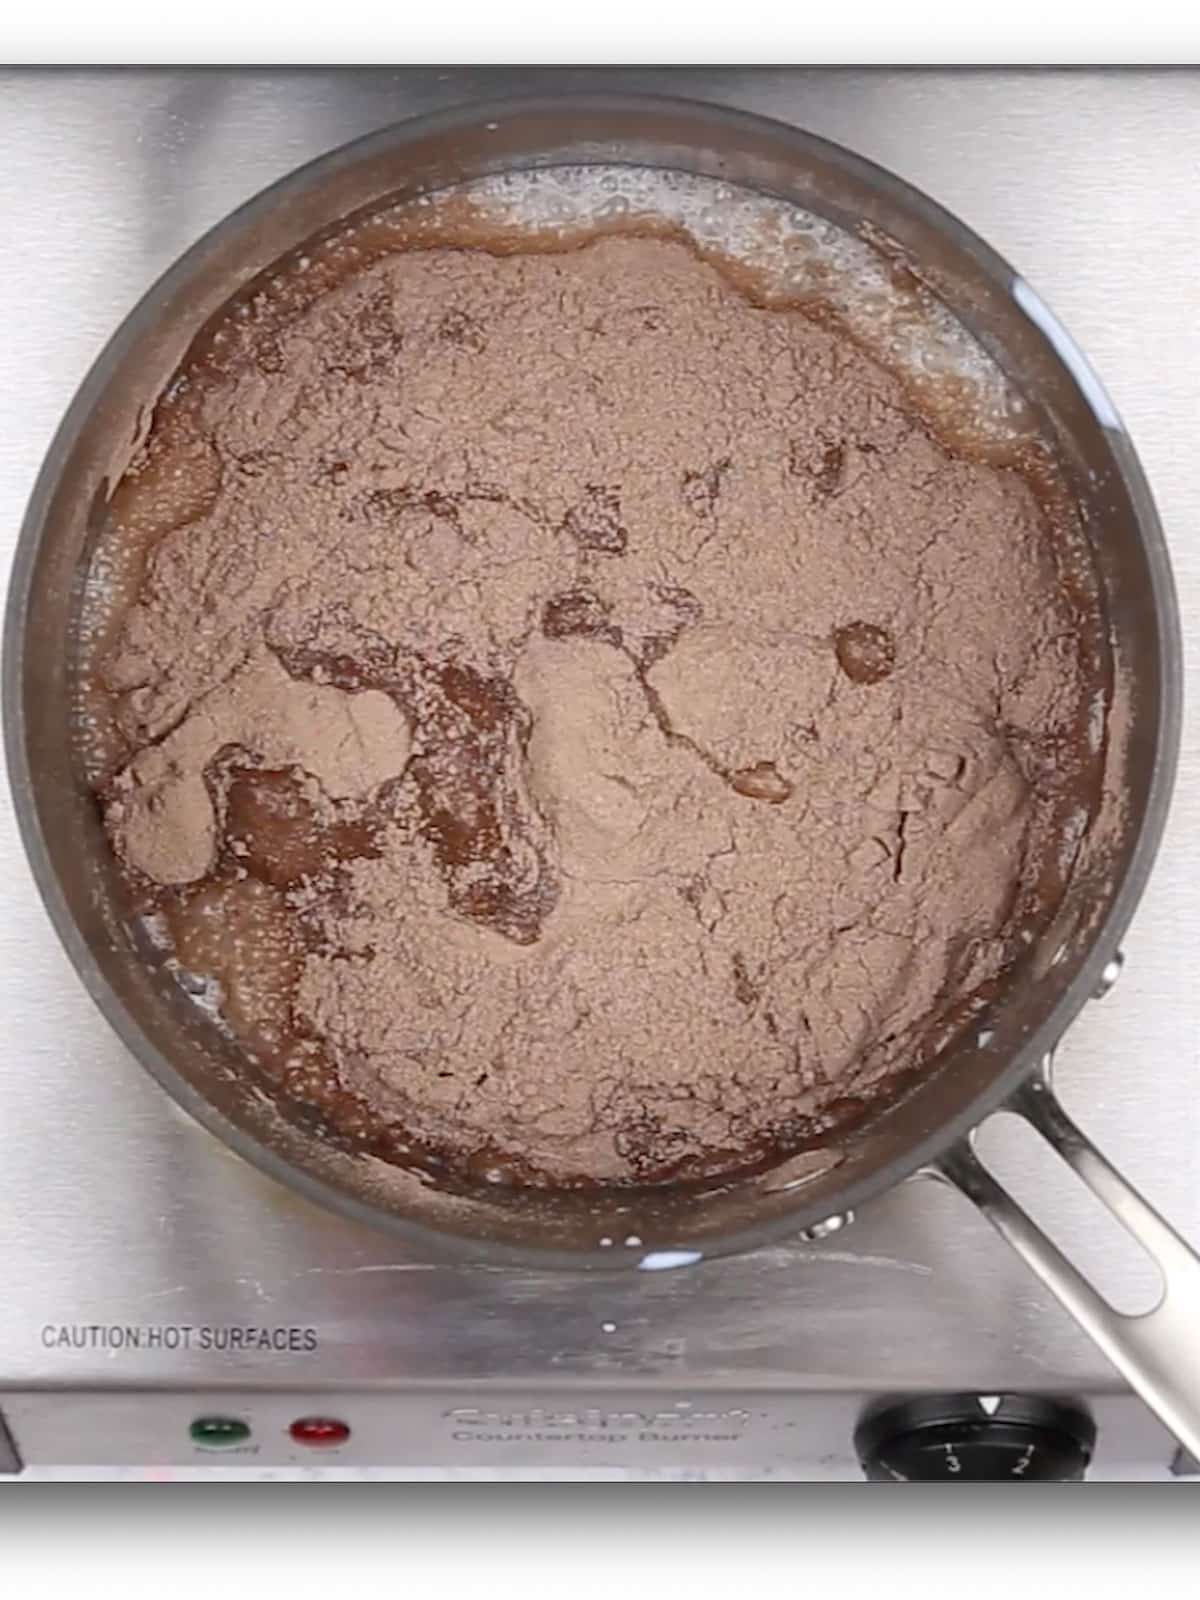 An overhead image of a pan with milk and pudding mix in it.